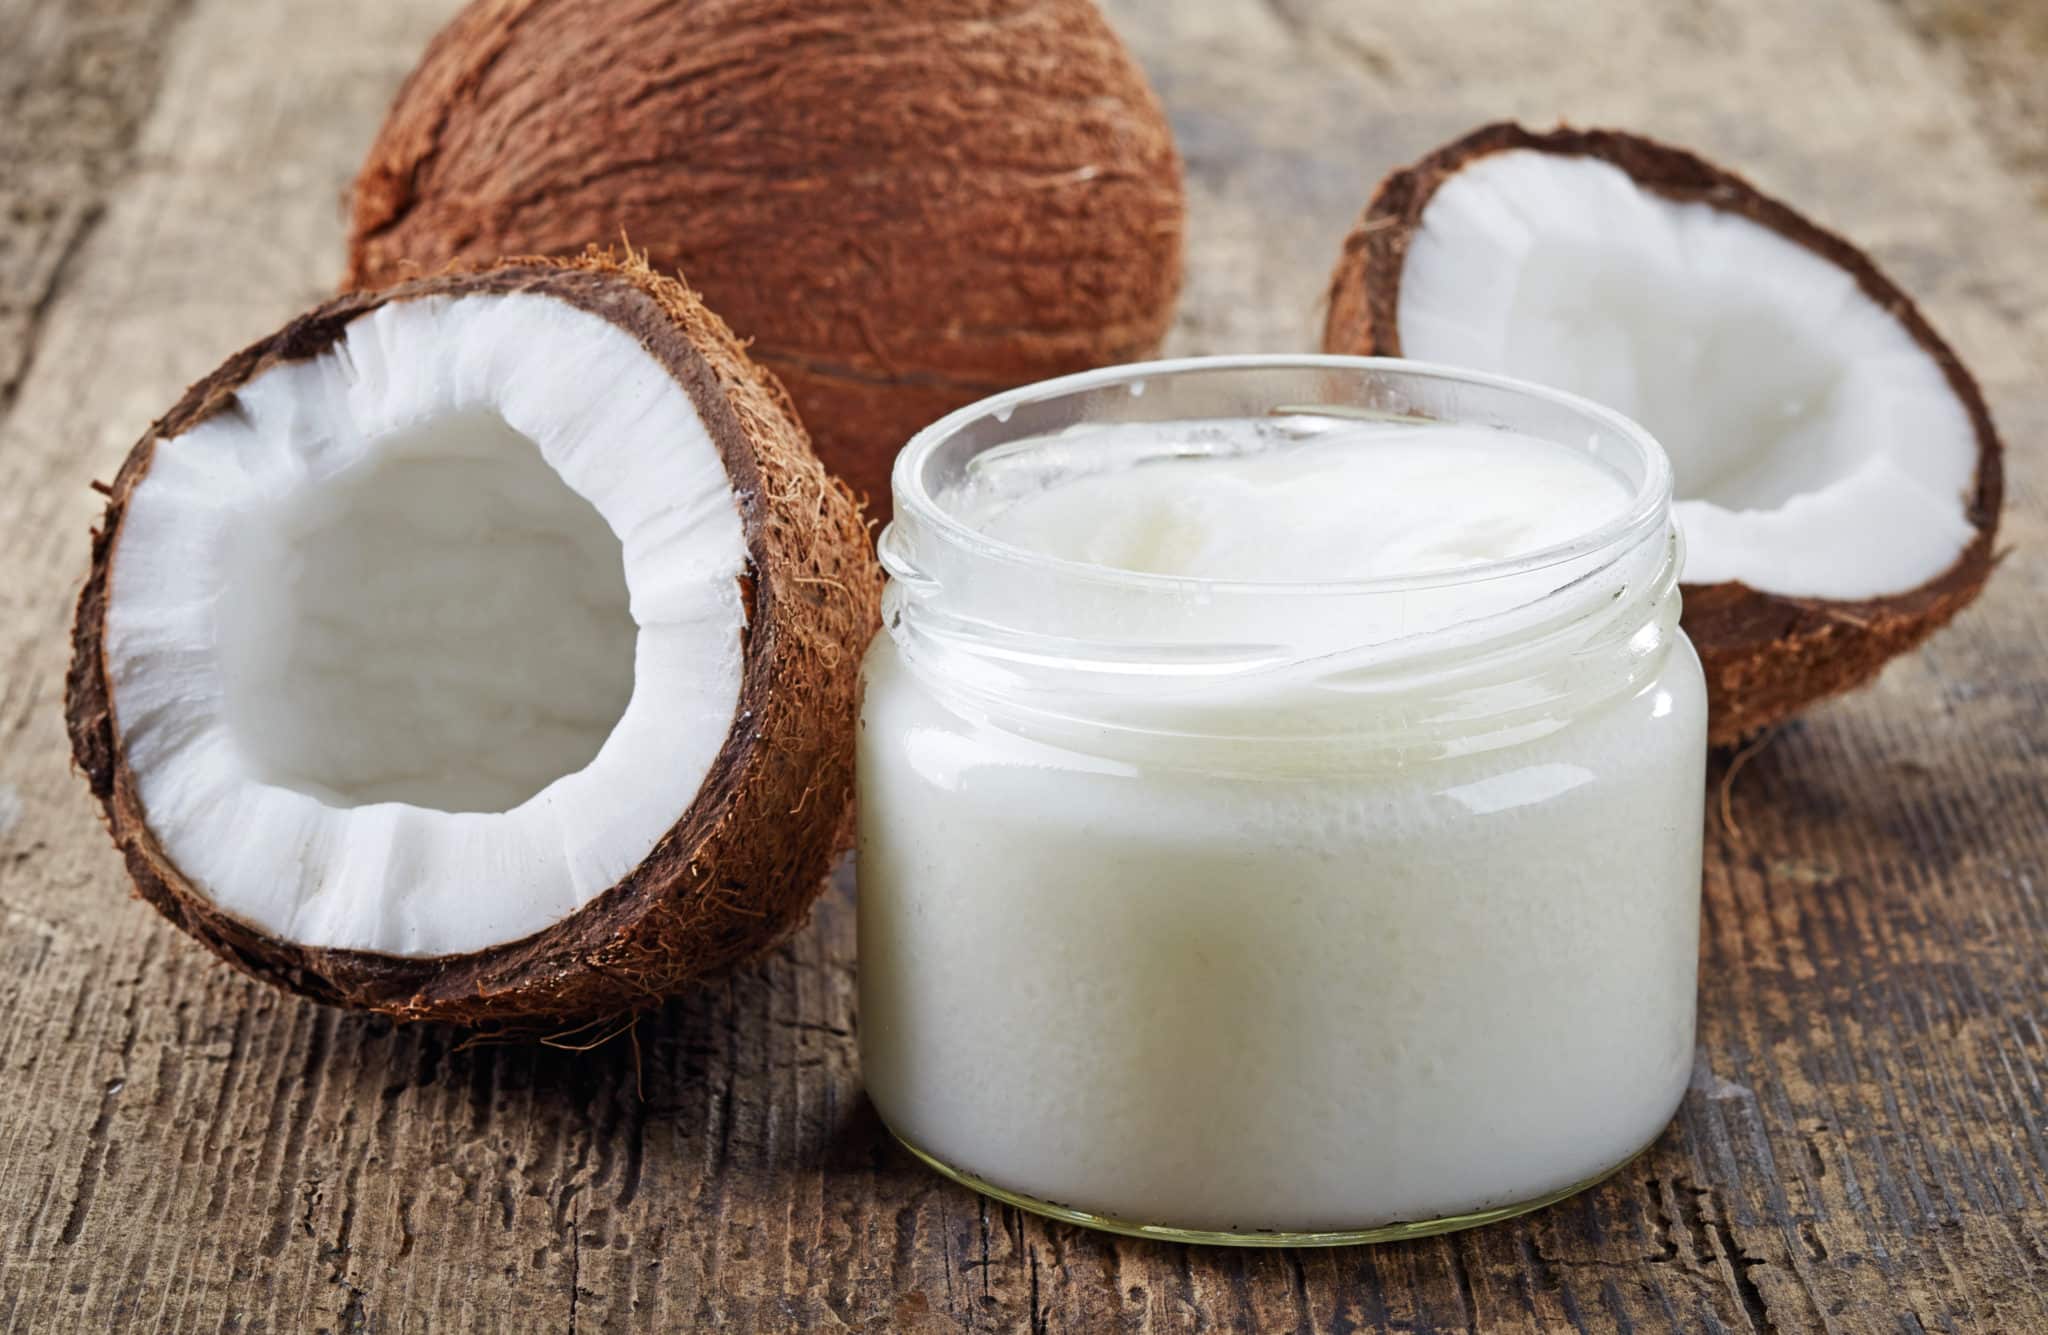 Jar of coconut oil next to whole and halved coconuts